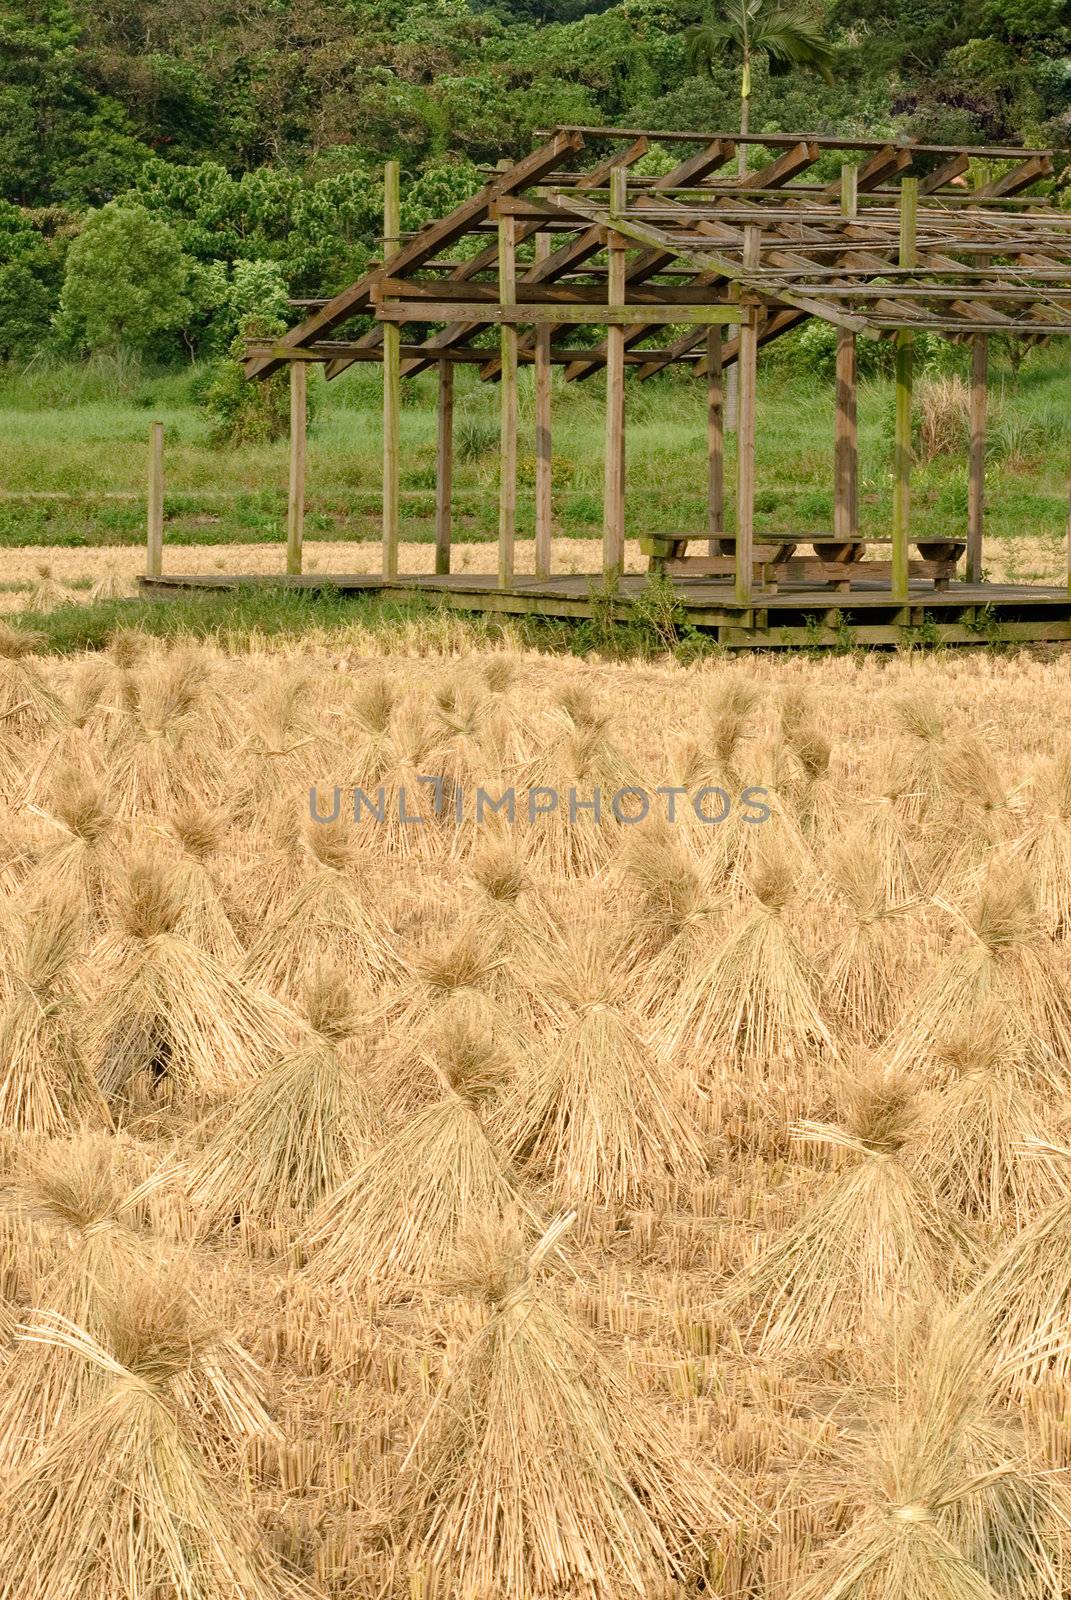 Here are the rice after harvest in Taiwan.